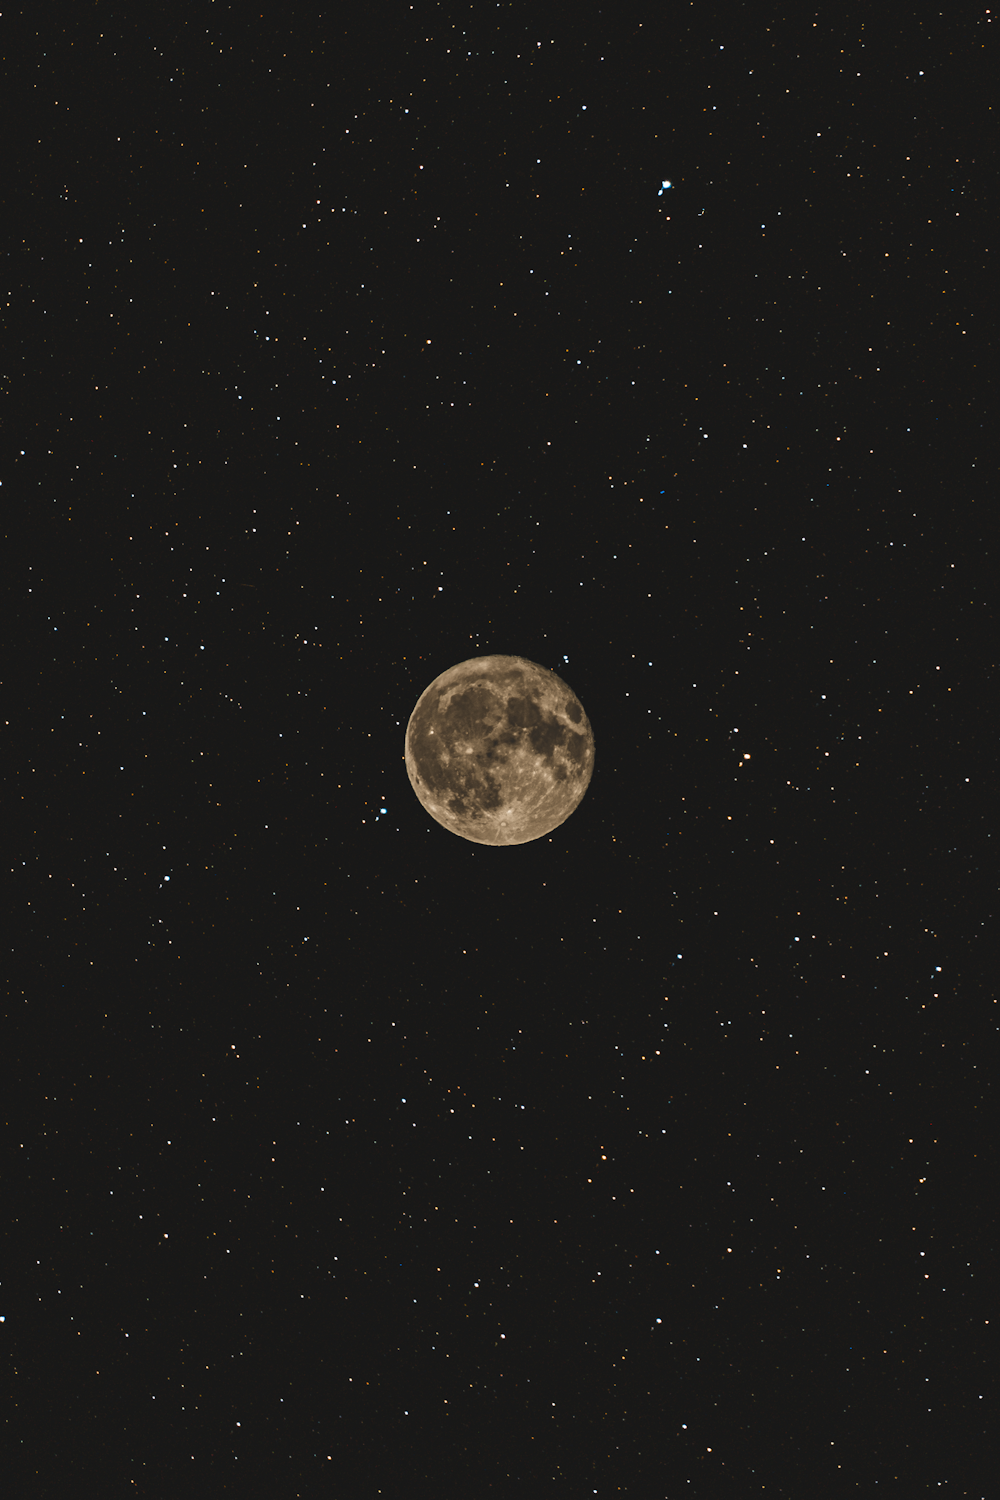 a full moon in the night sky with stars